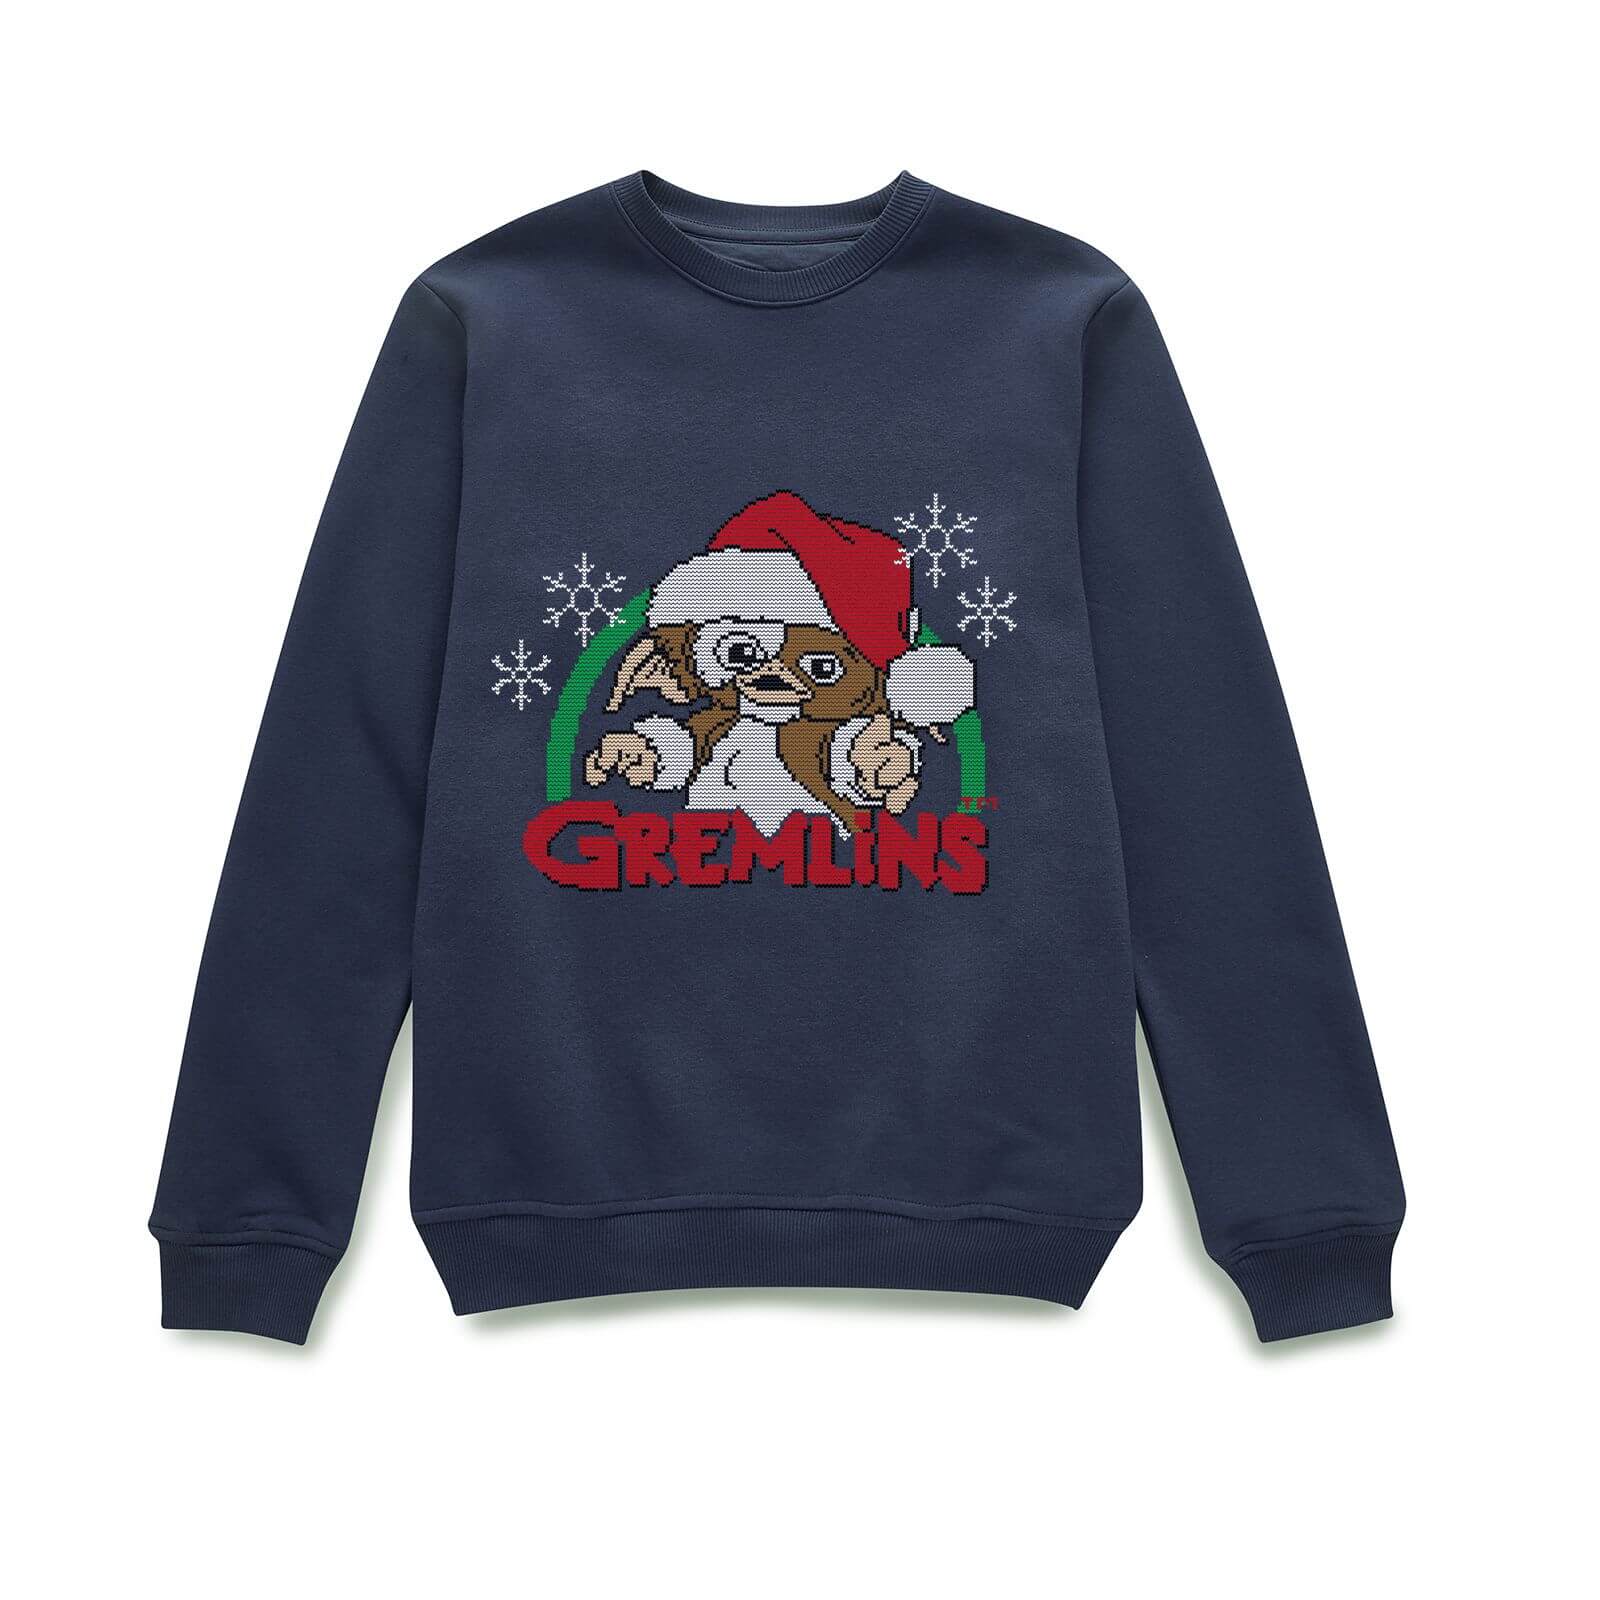 Gremlins Another Reason To Hate Christmas Jumper - Navy - S - Navy product